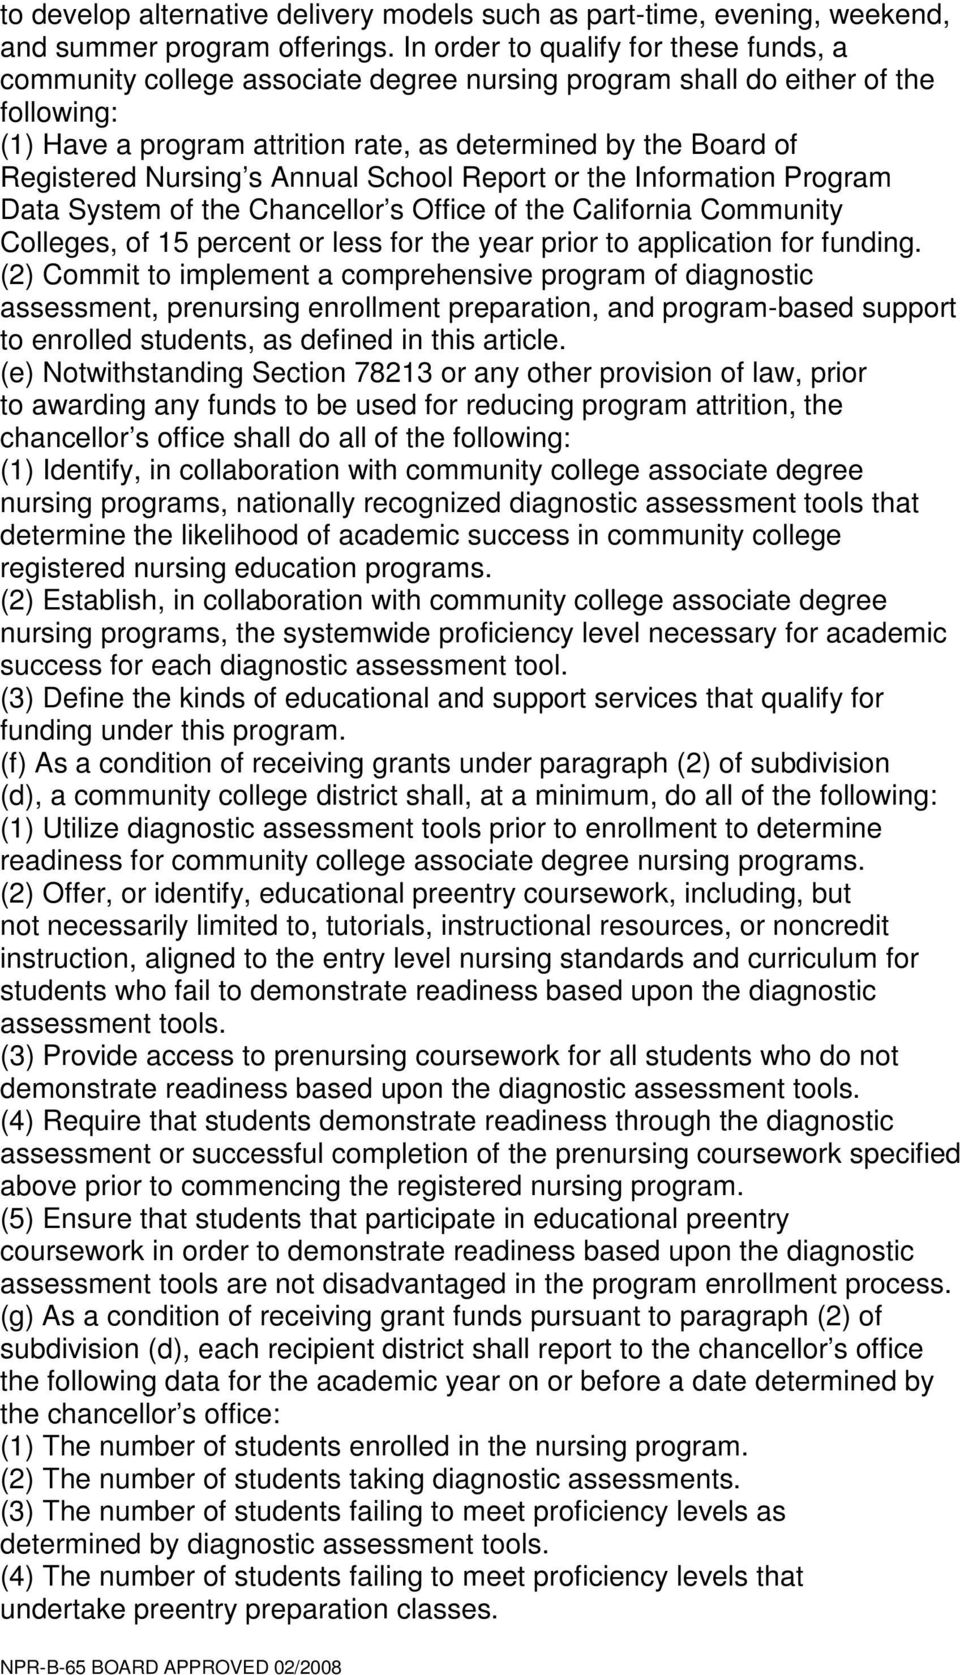 Nursing s Annual School Report or the Information Program Data System of the Chancellor s Office of the California Community Colleges, of 15 percent or less for the year prior to application for